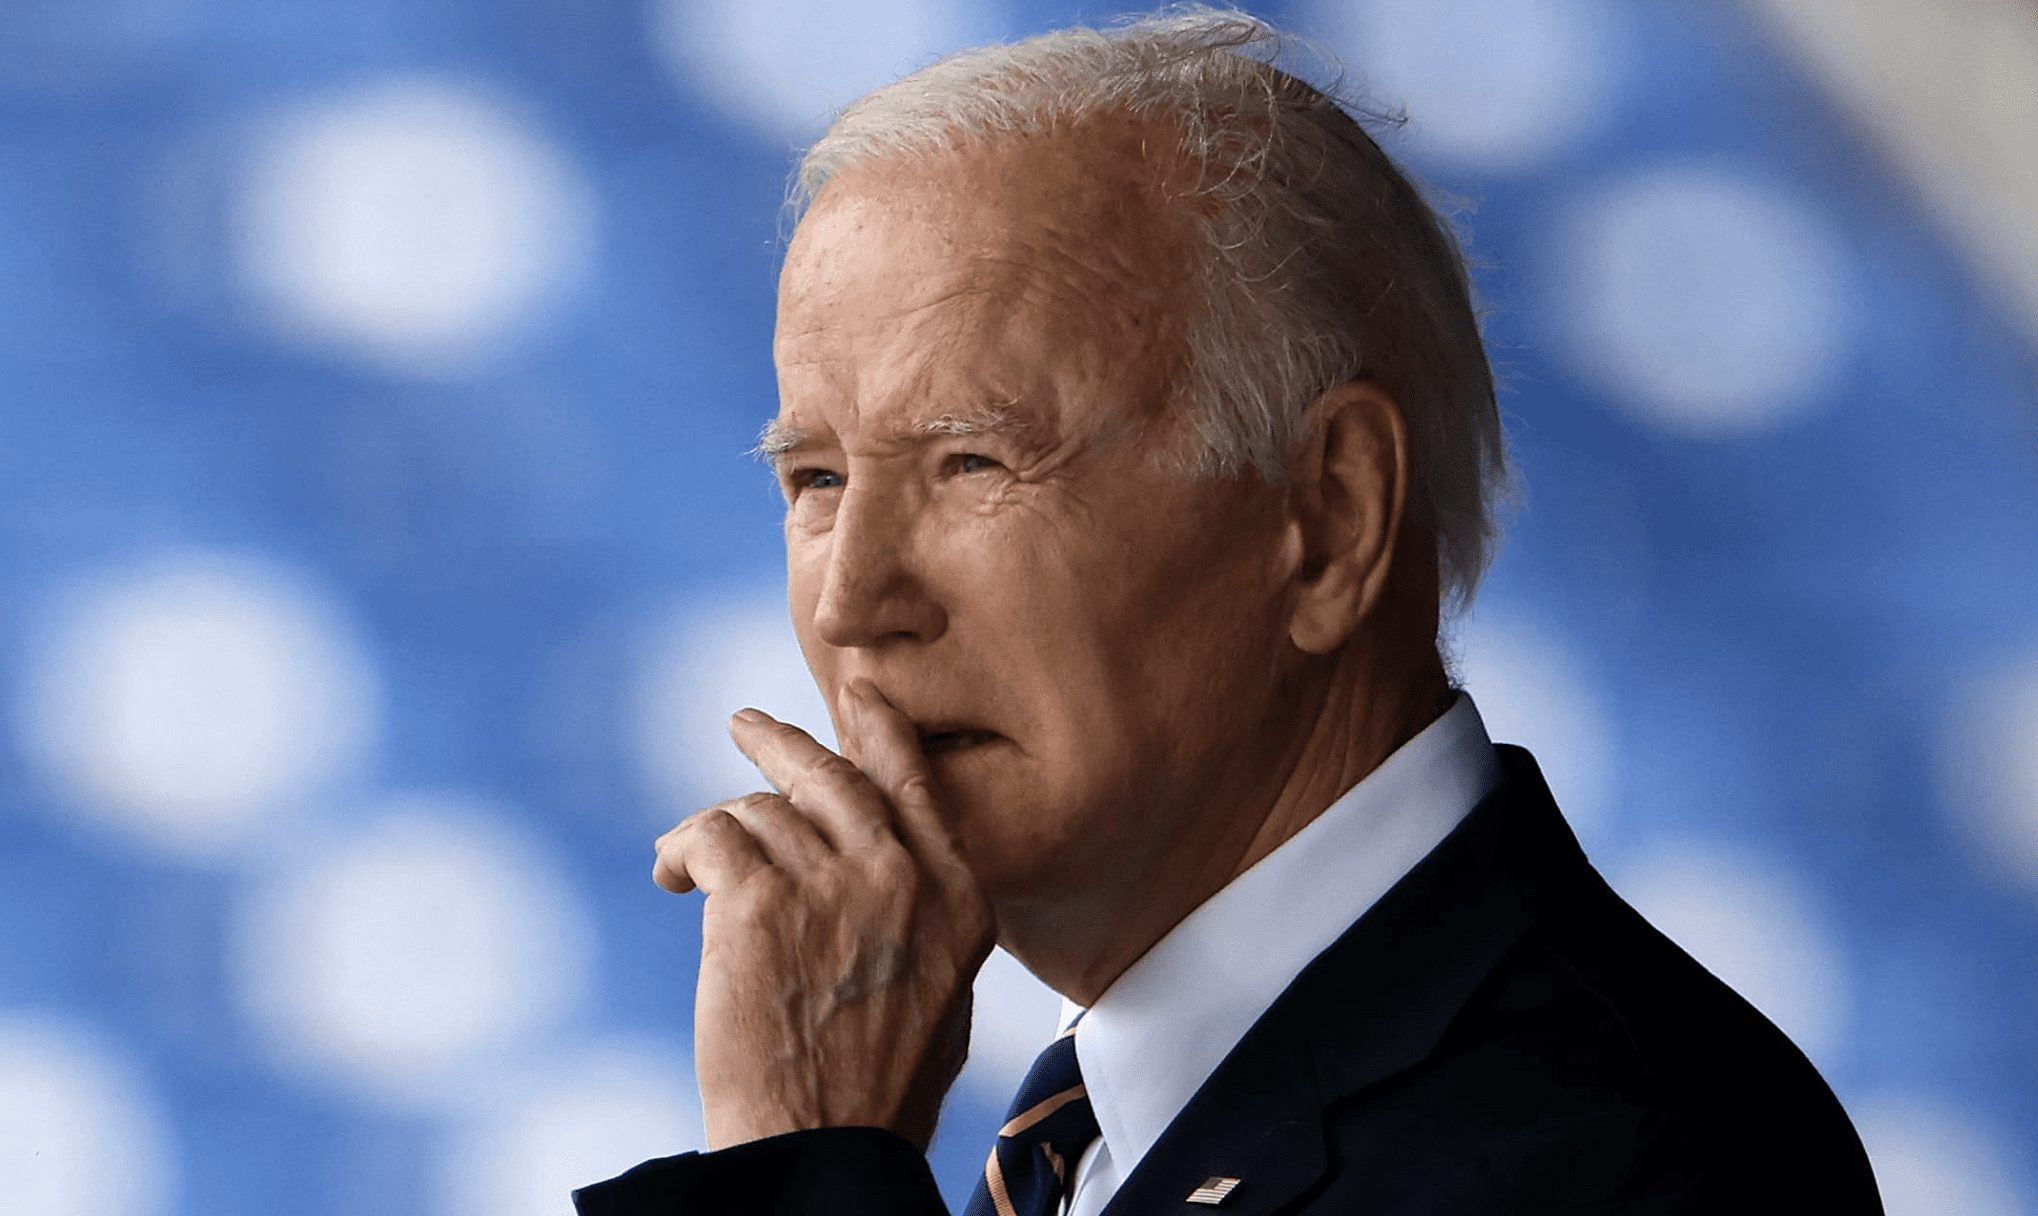 Biden Appears to Say He Has Cancer